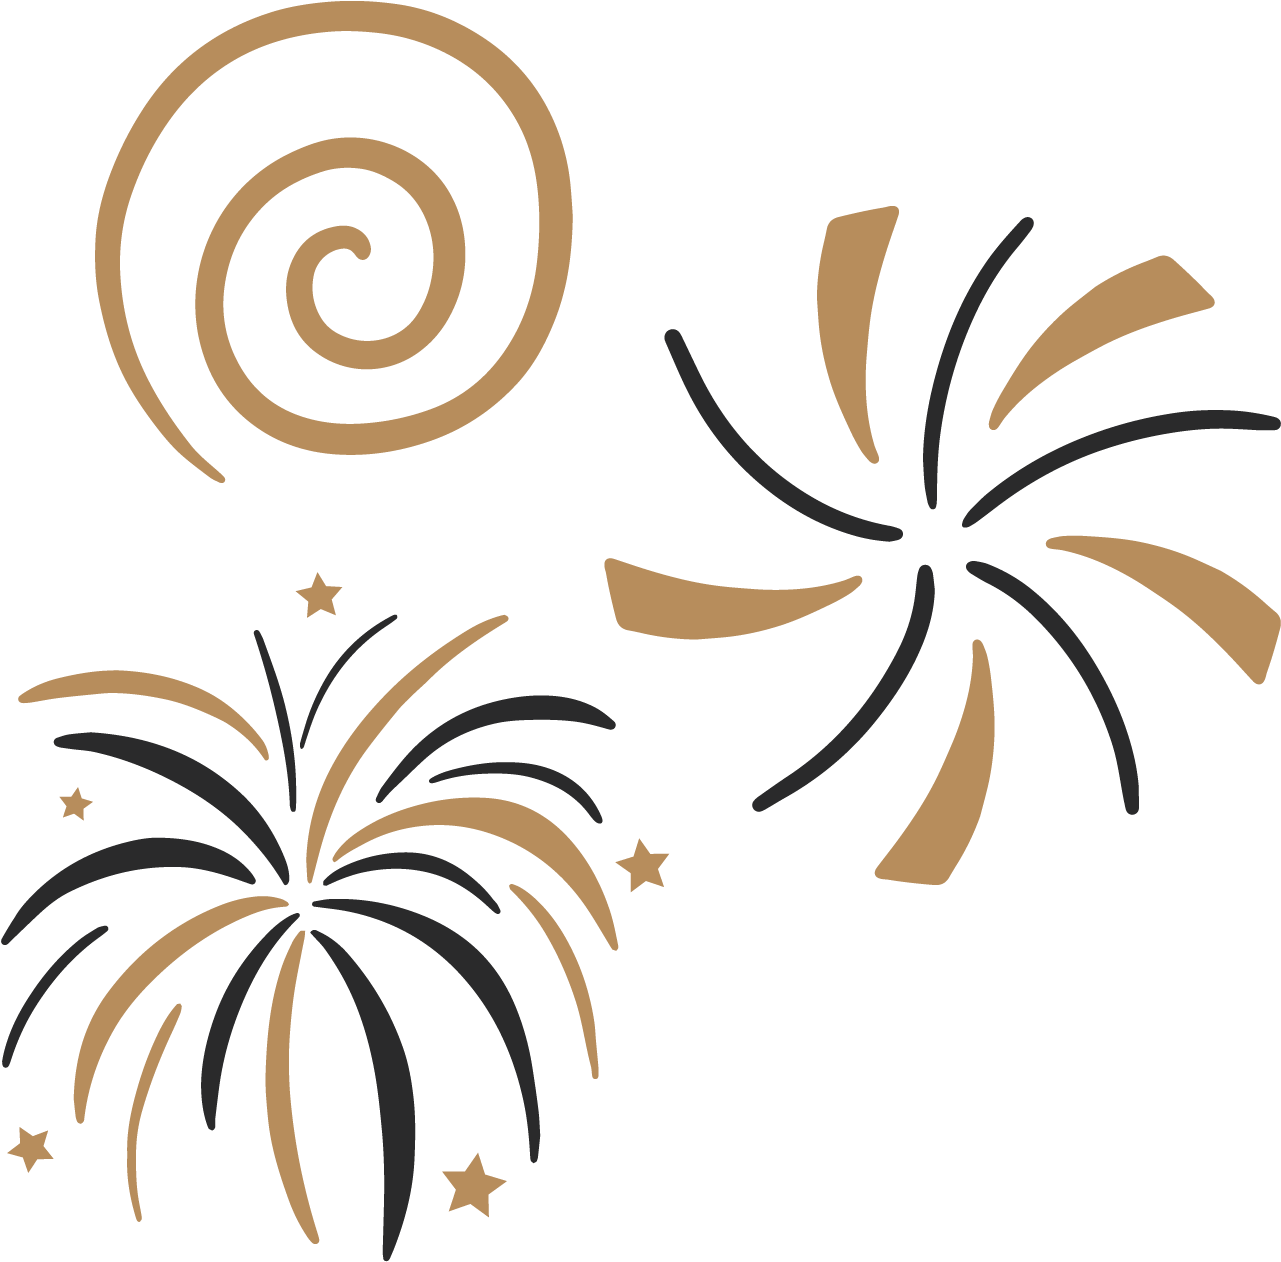 Abstract Fireworks Graphic PNG image